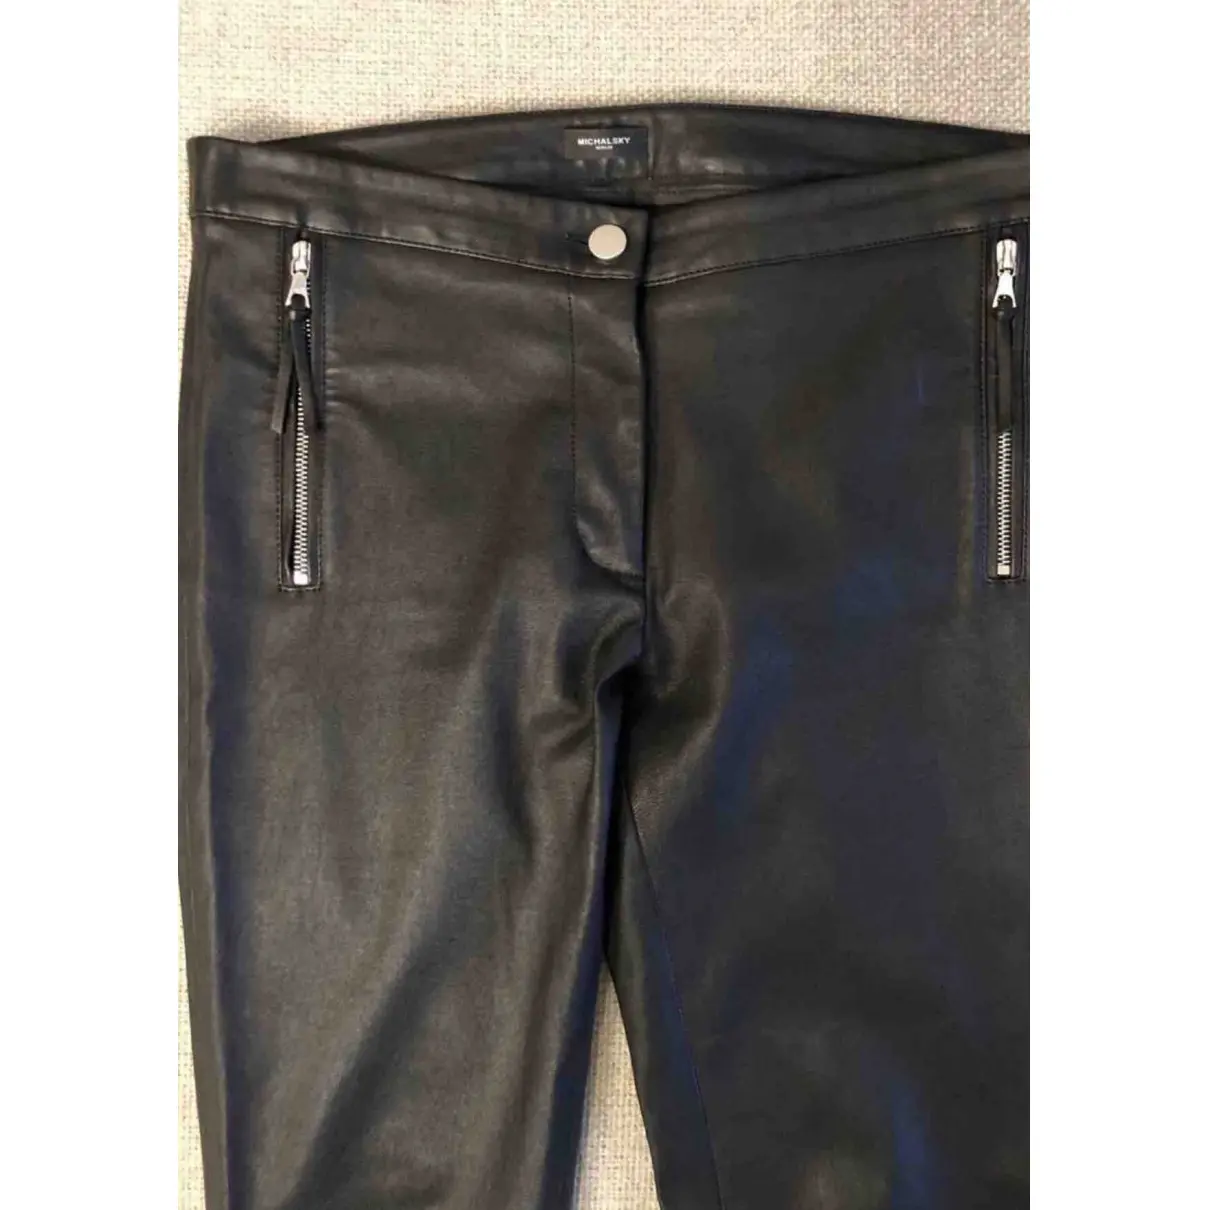 Buy Michalsky Leather trousers online